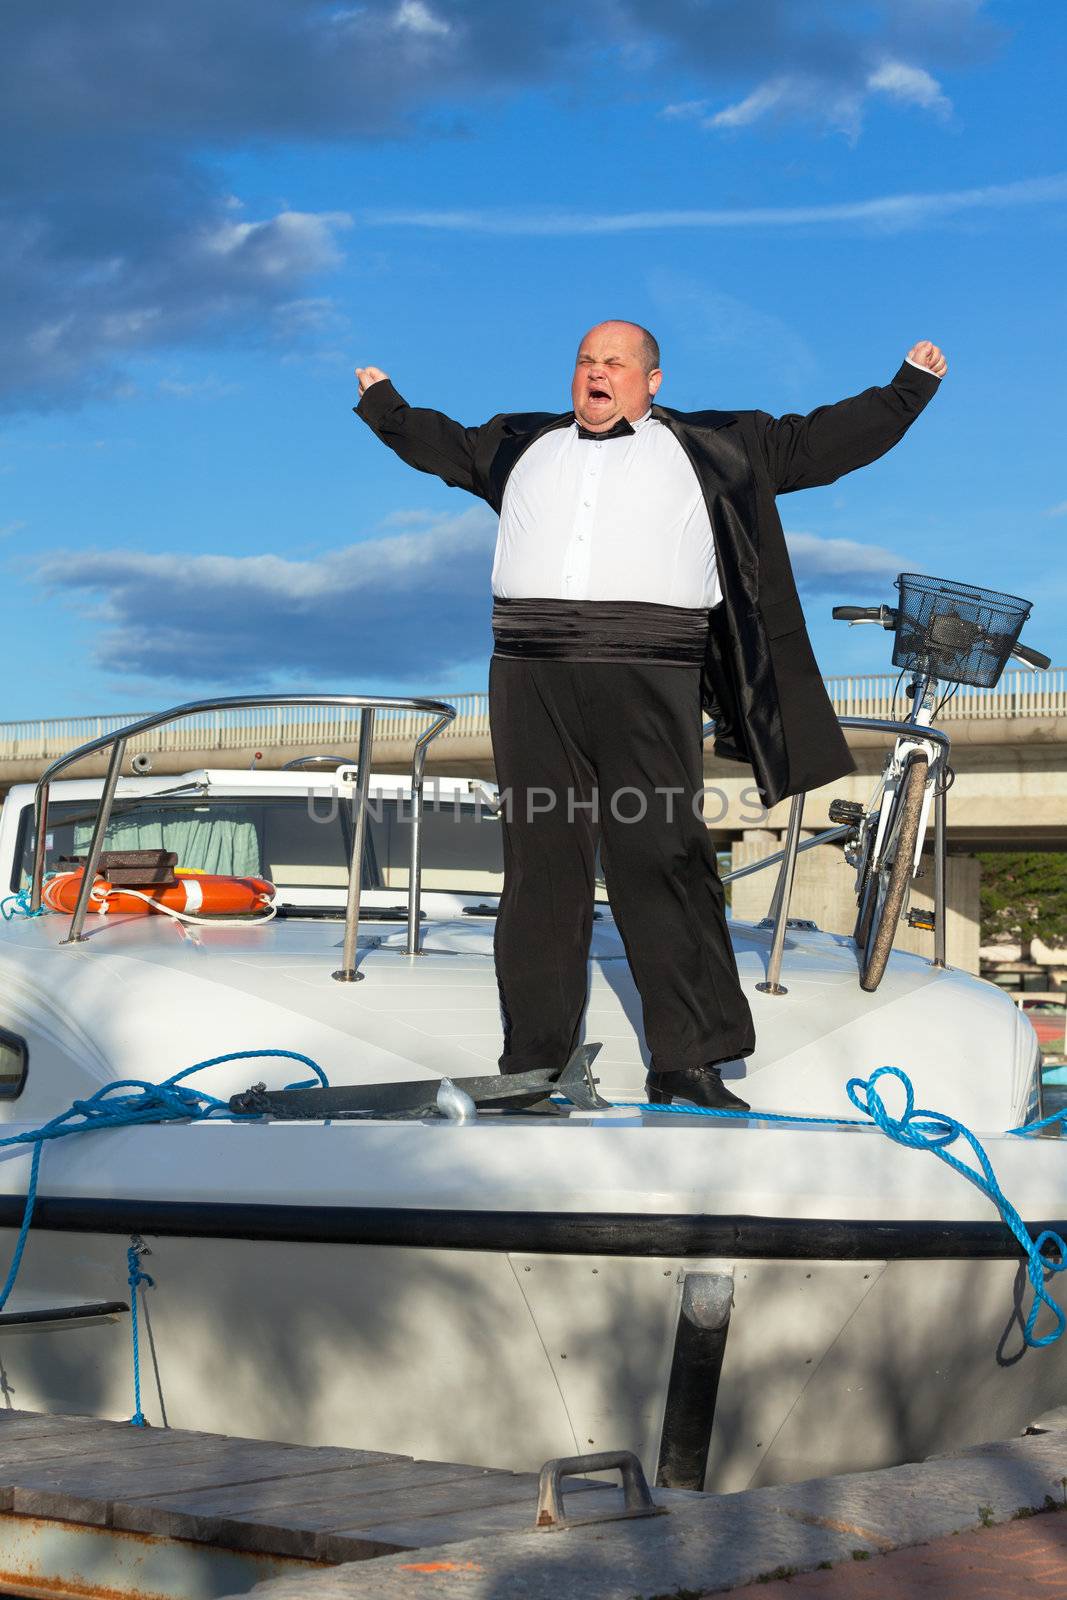 Fat man in tuxedo on deck boat by Discovod